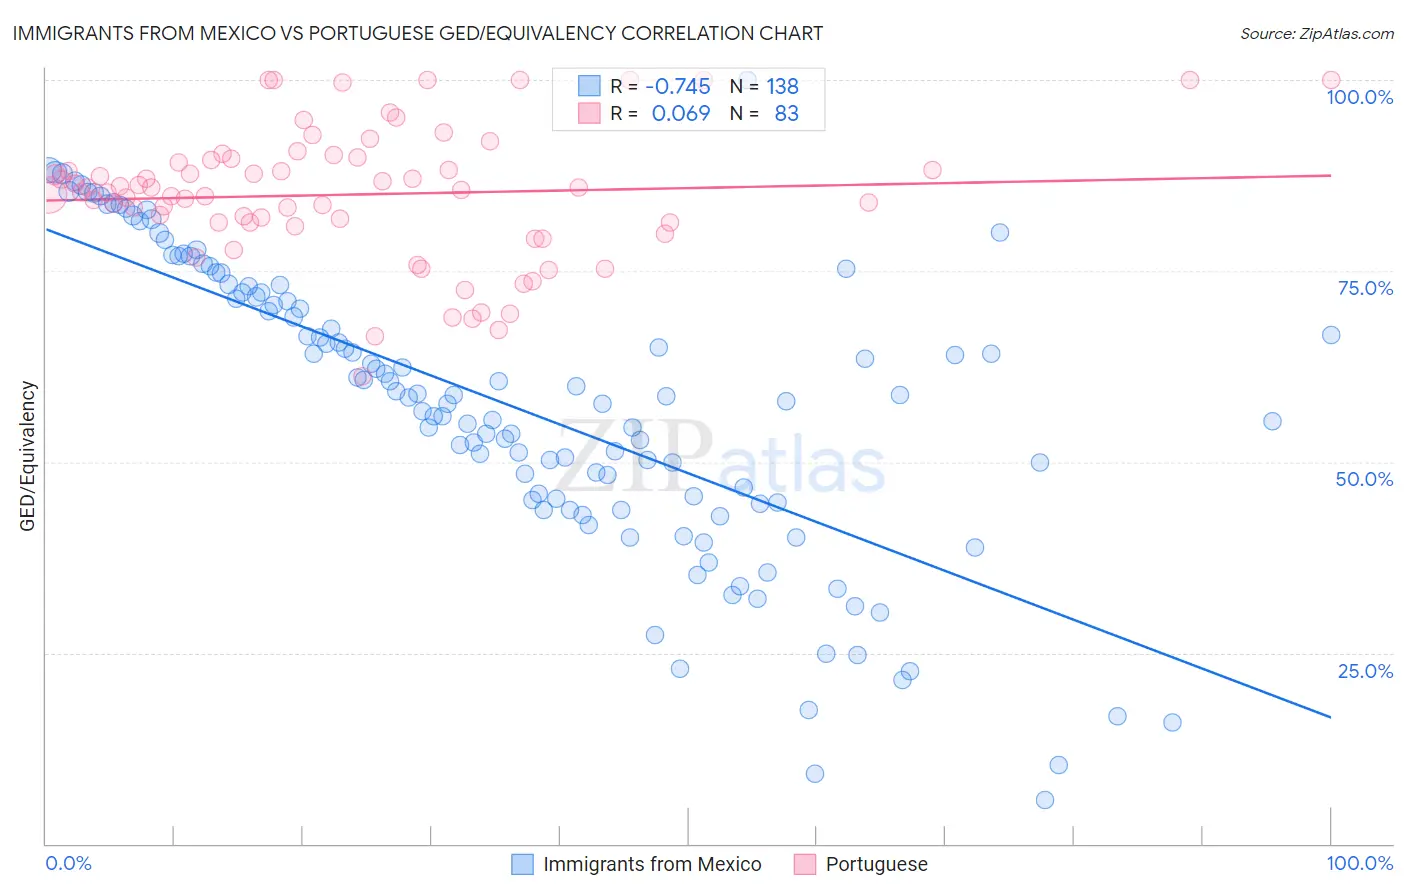 Immigrants from Mexico vs Portuguese GED/Equivalency